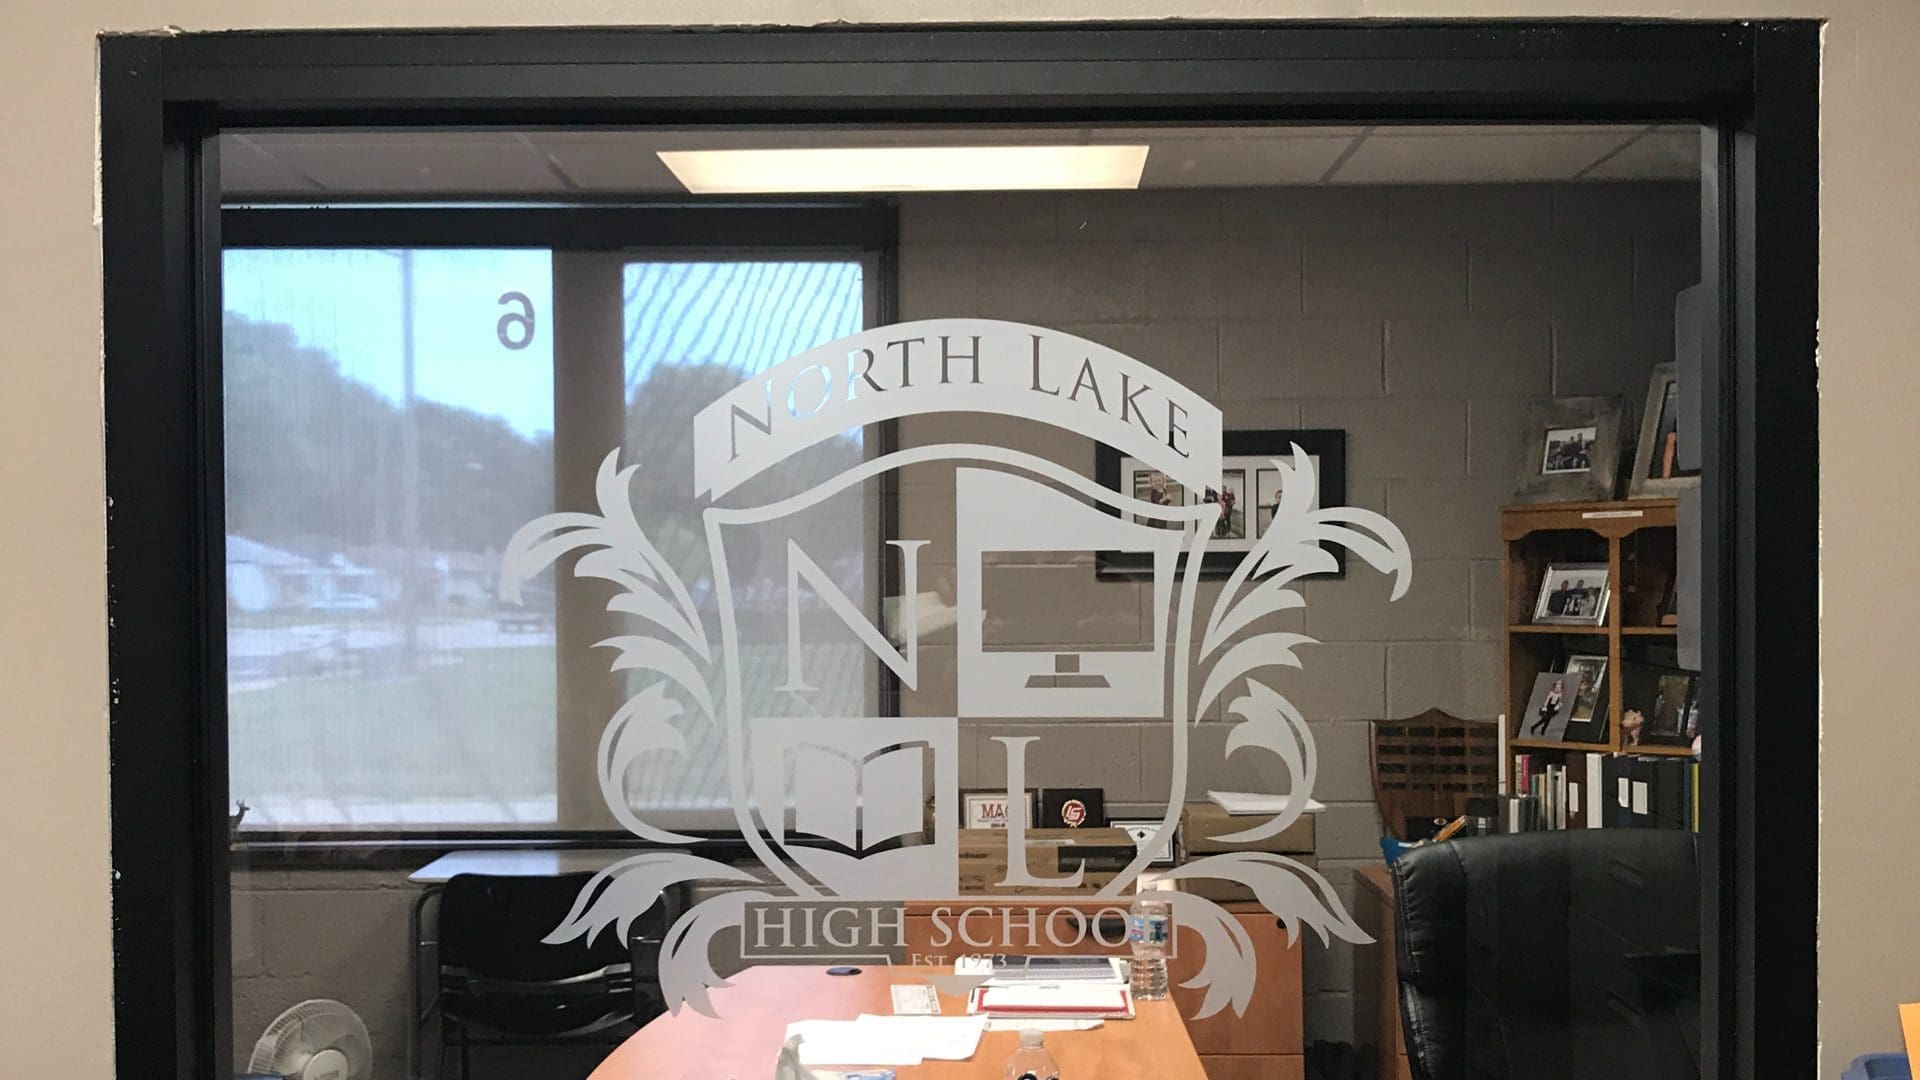 North Lake High School – Frosted Vinyl Logo